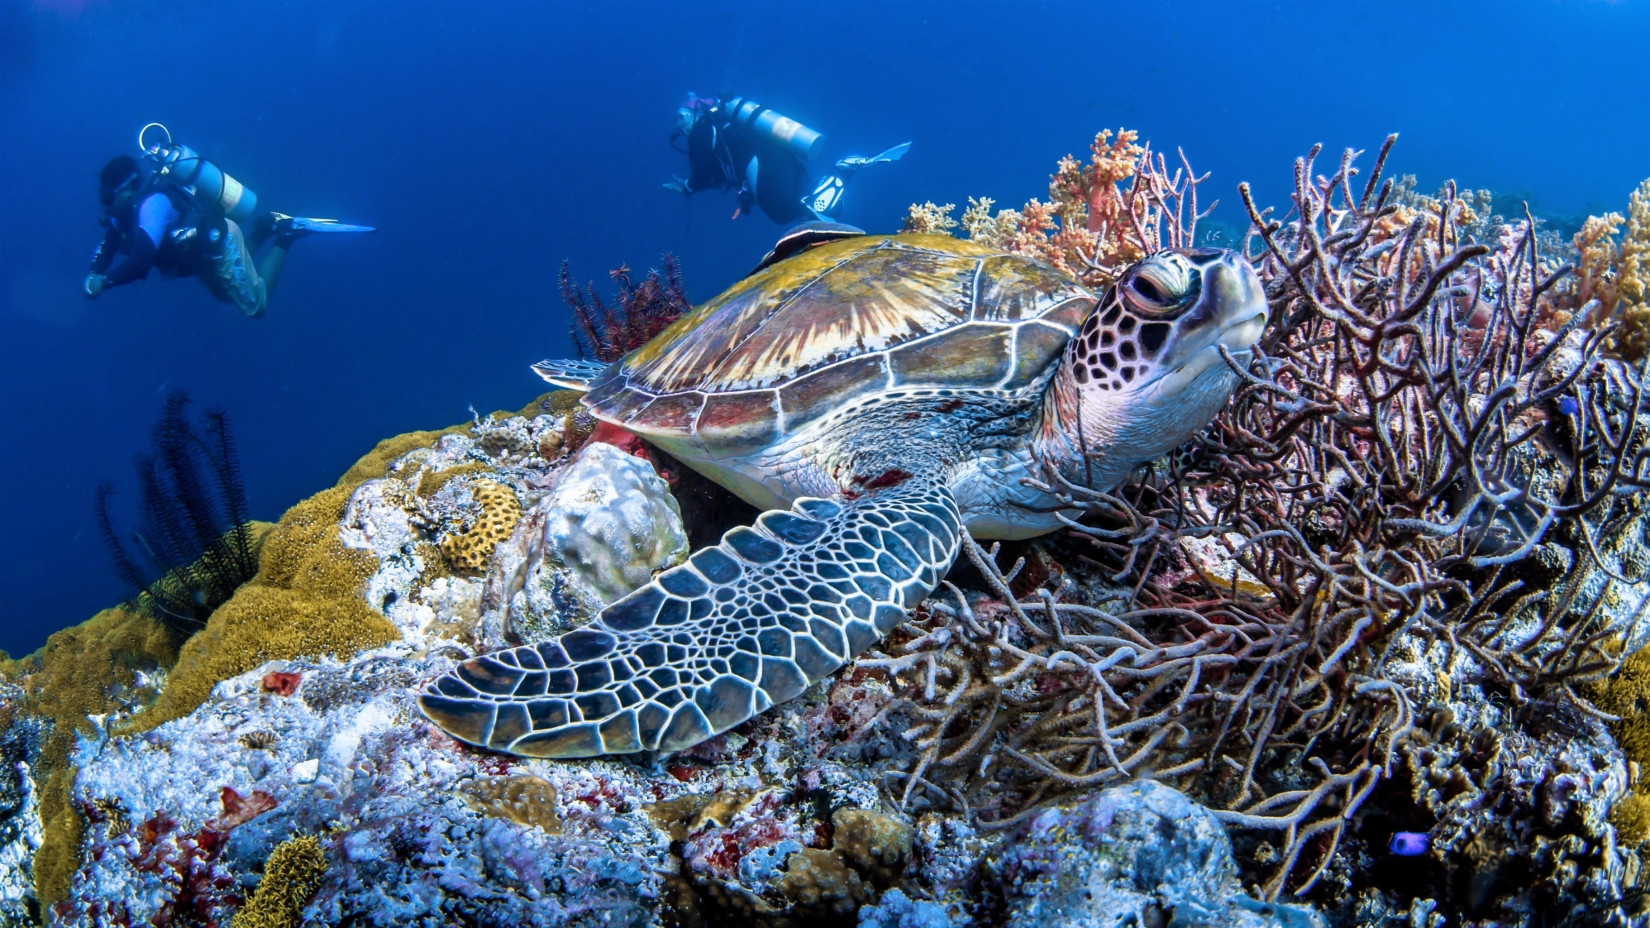 A large sea turtle resting on coral reefs with two divers in the background